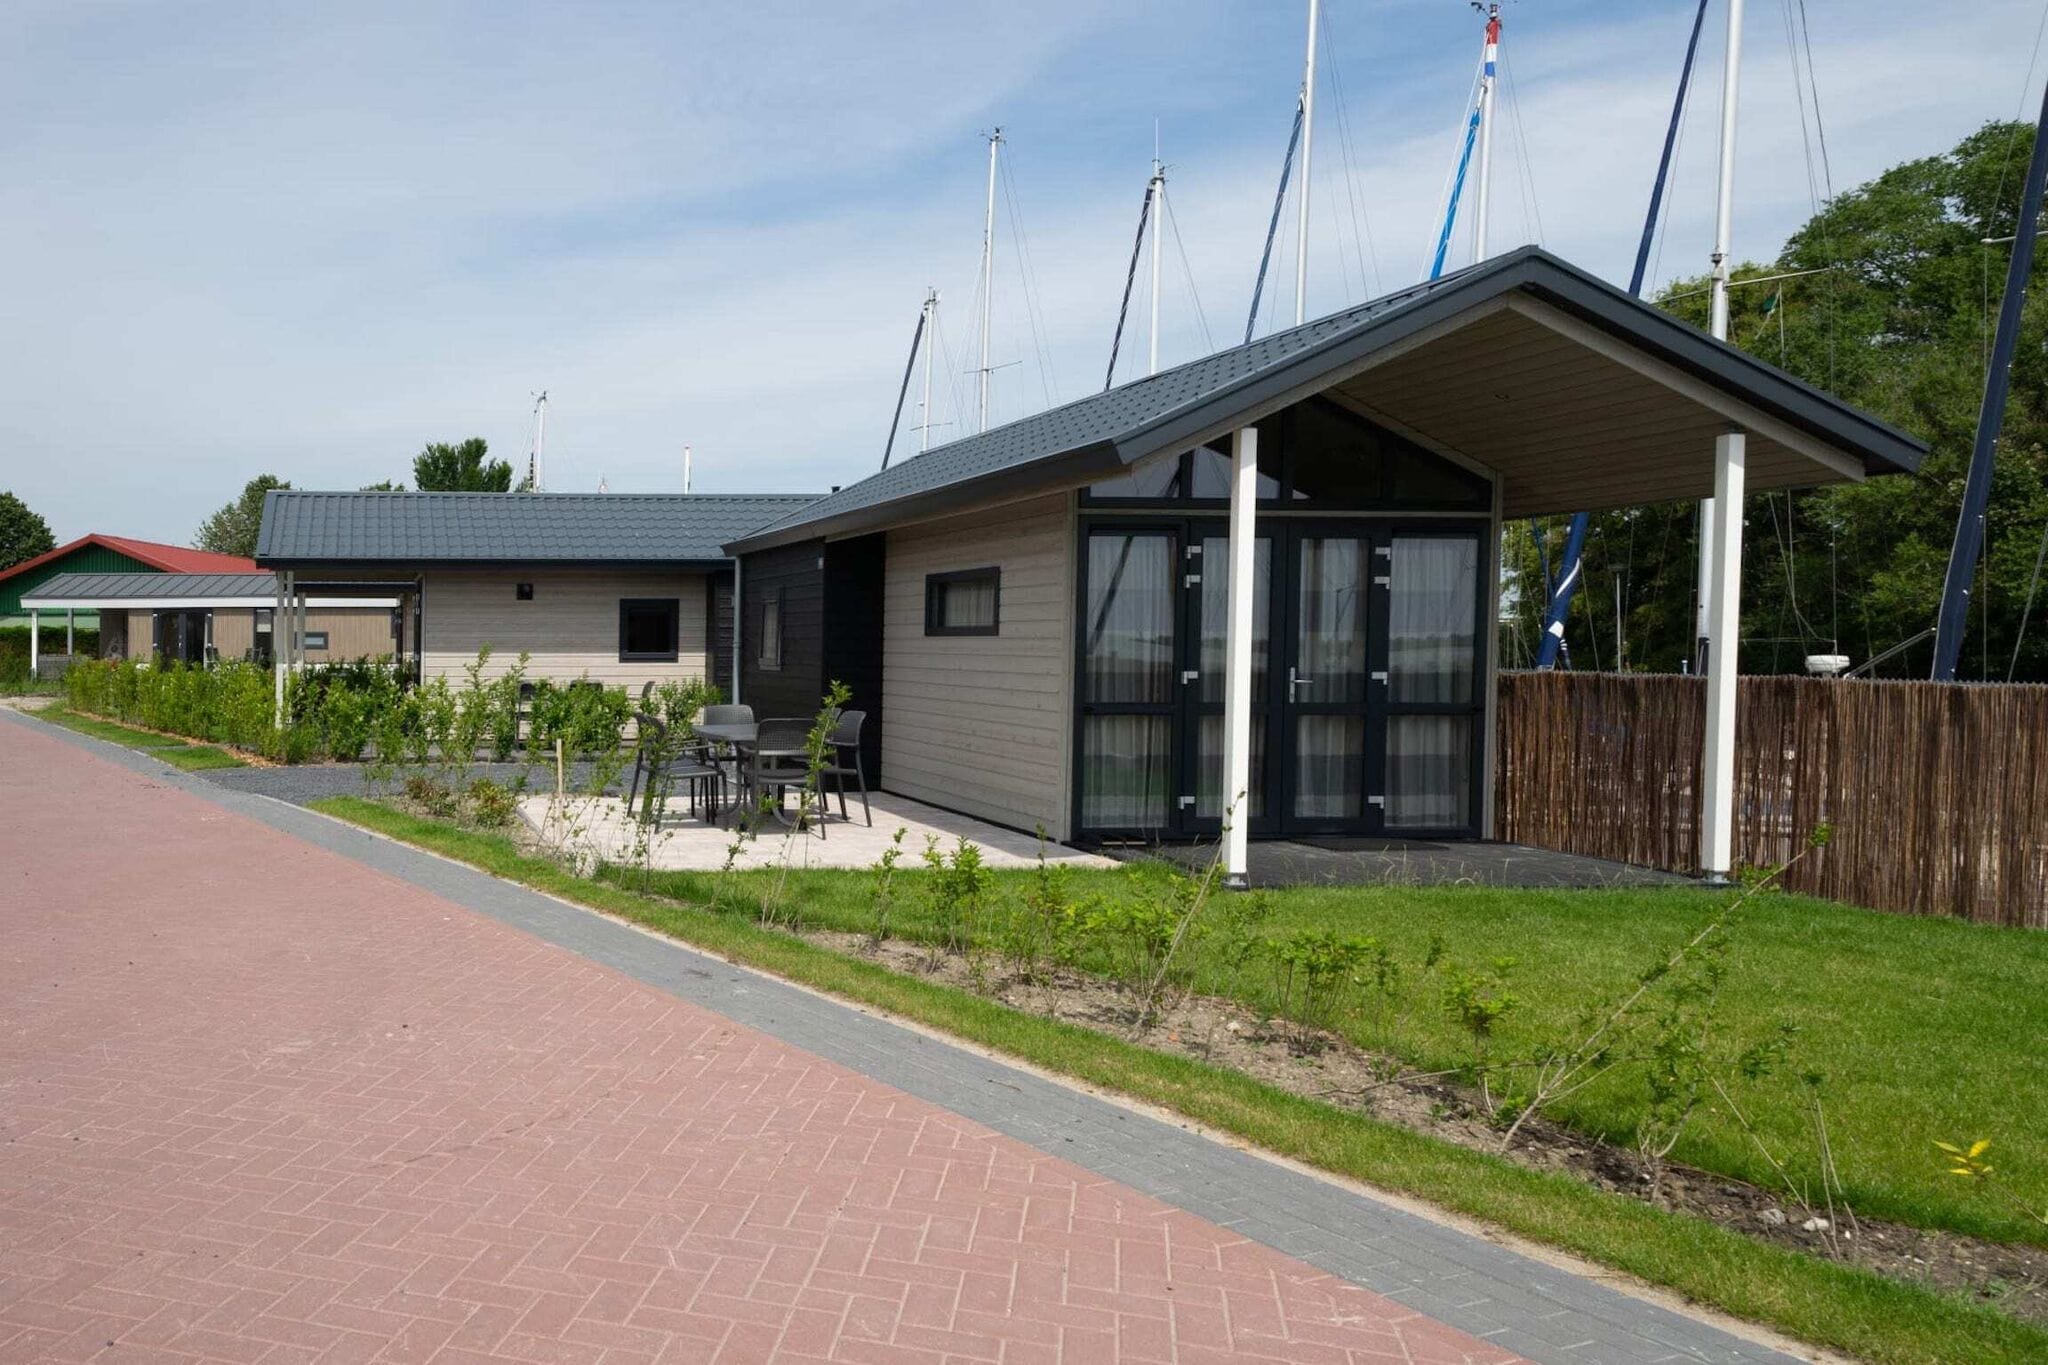 Compact, modern lodge nearby the Markermeer